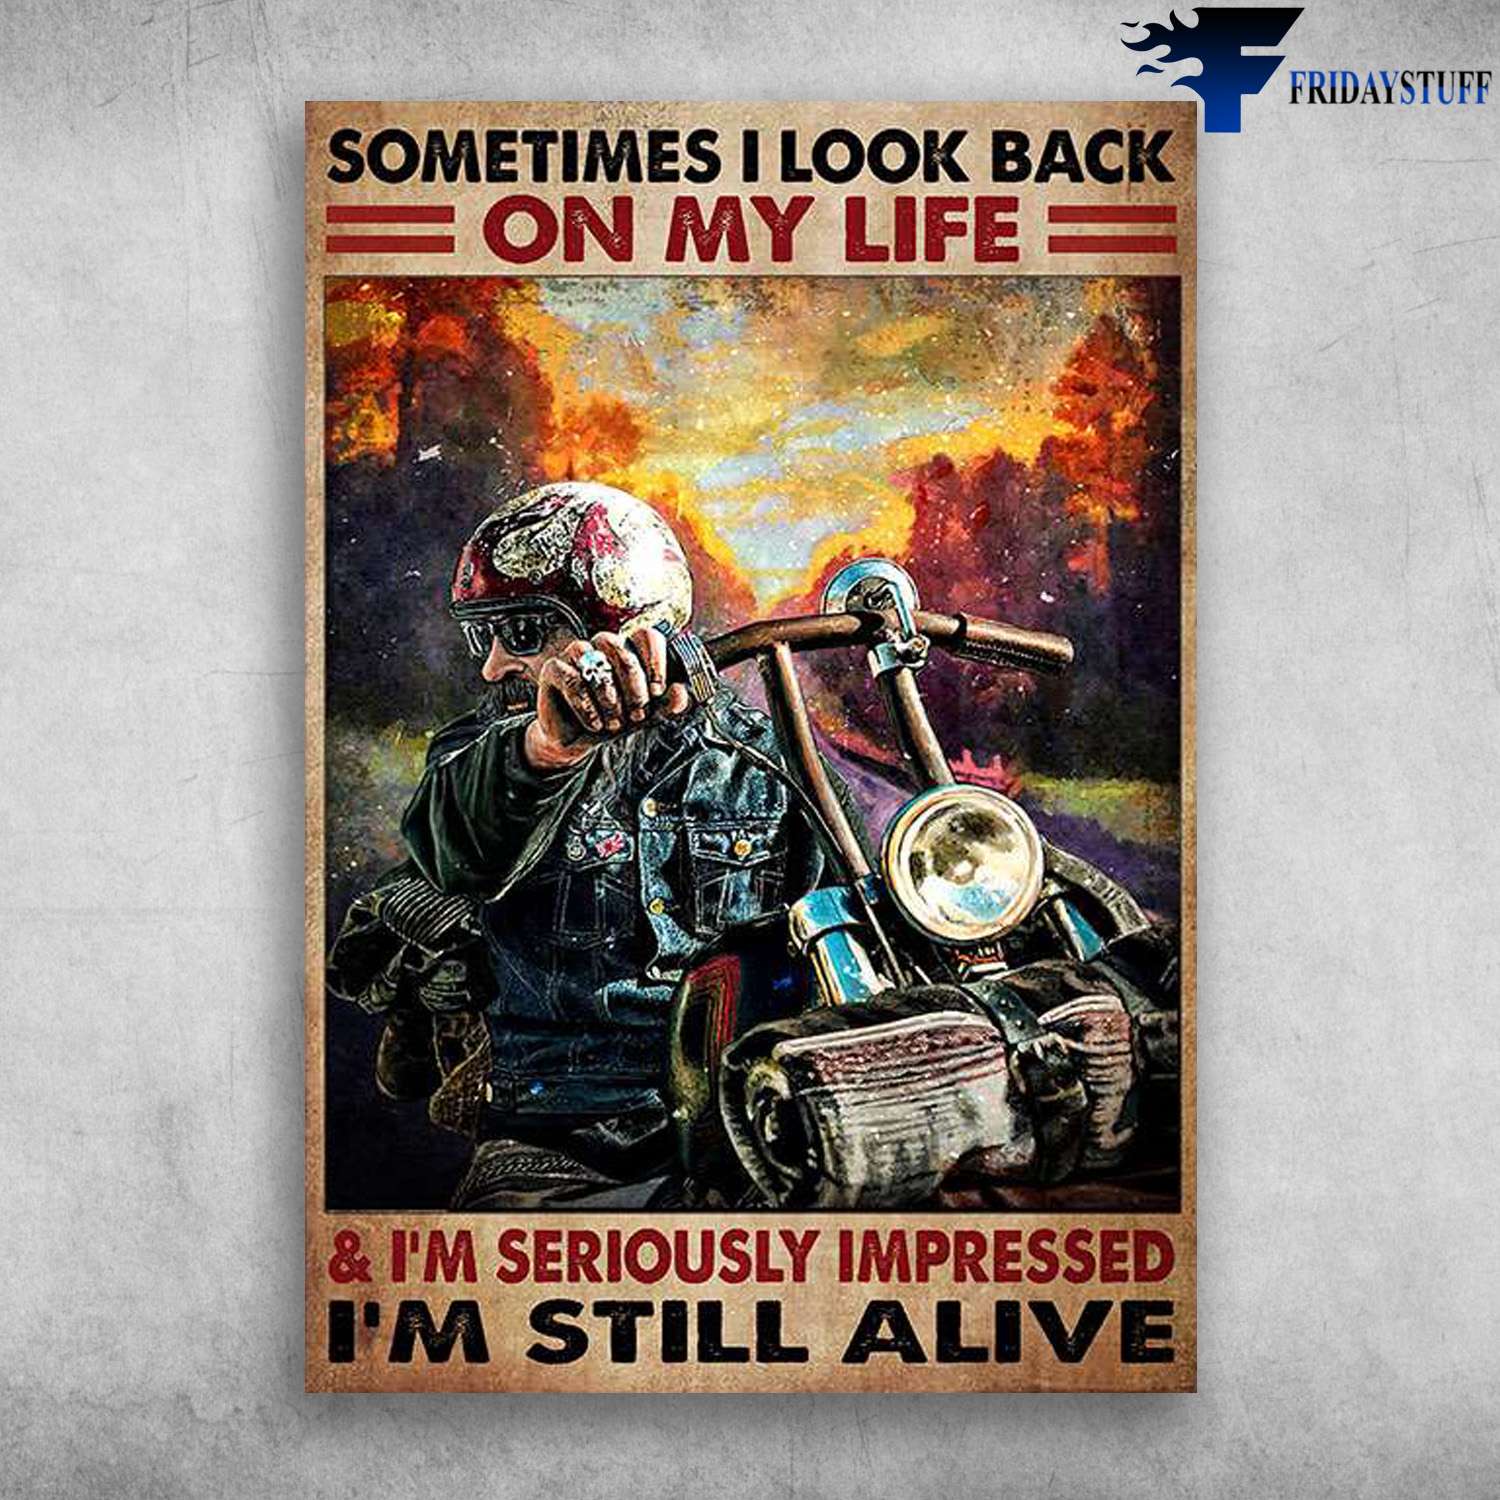 Old Man Riding, Biker Lover - Sometimes I Look Back On My Life, And I'm Seriously Impressed, I'm Still Alive, Motorcycle Man